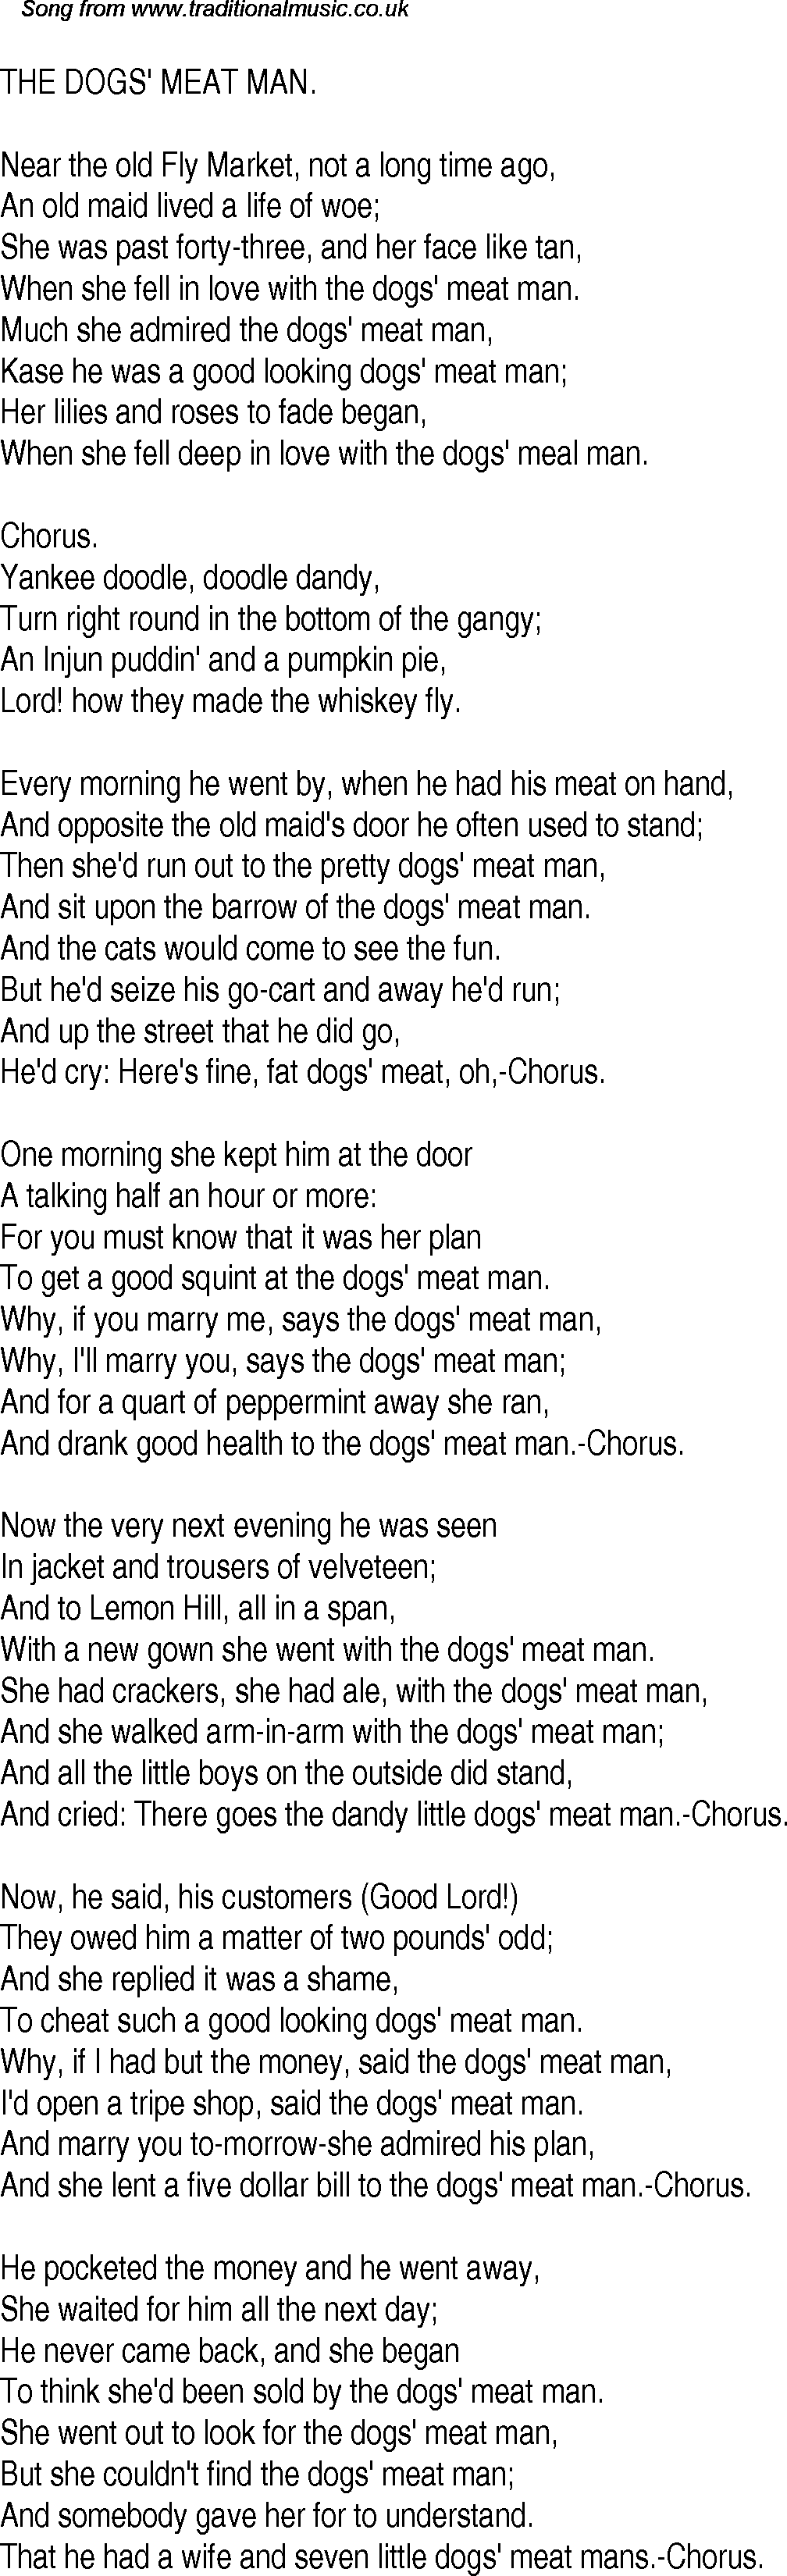 Old Time Song Lyrics For 16 The Dogs Meat Man